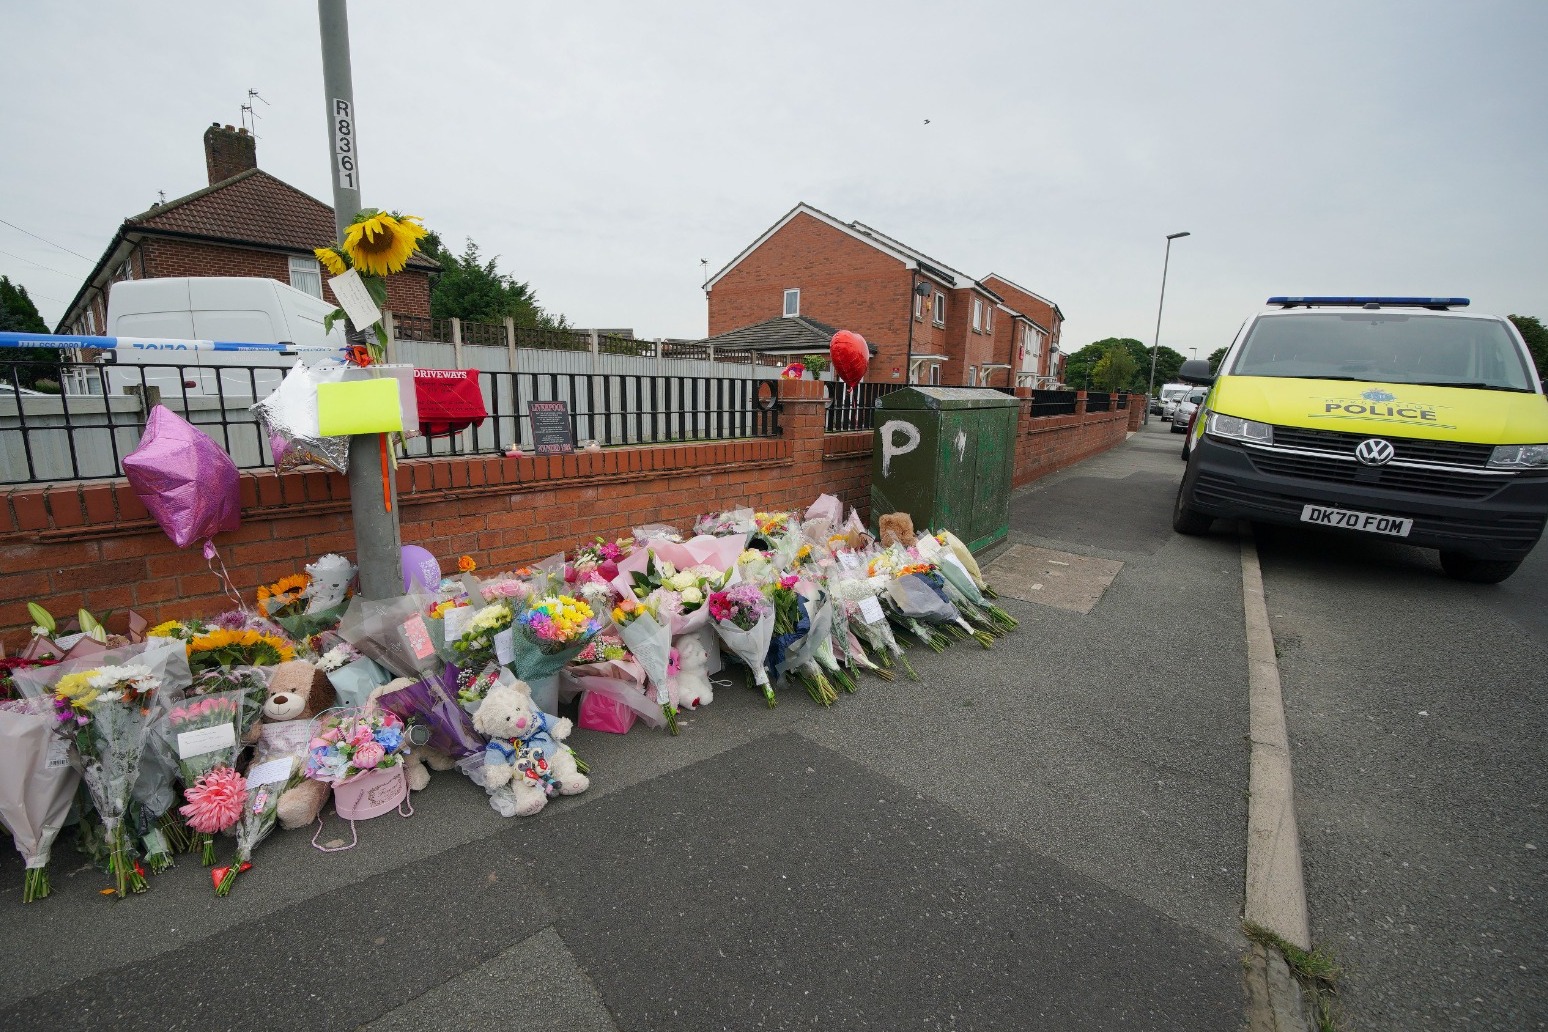 Police officer tried to save Olivia by covering gunshot wound, inquest told 